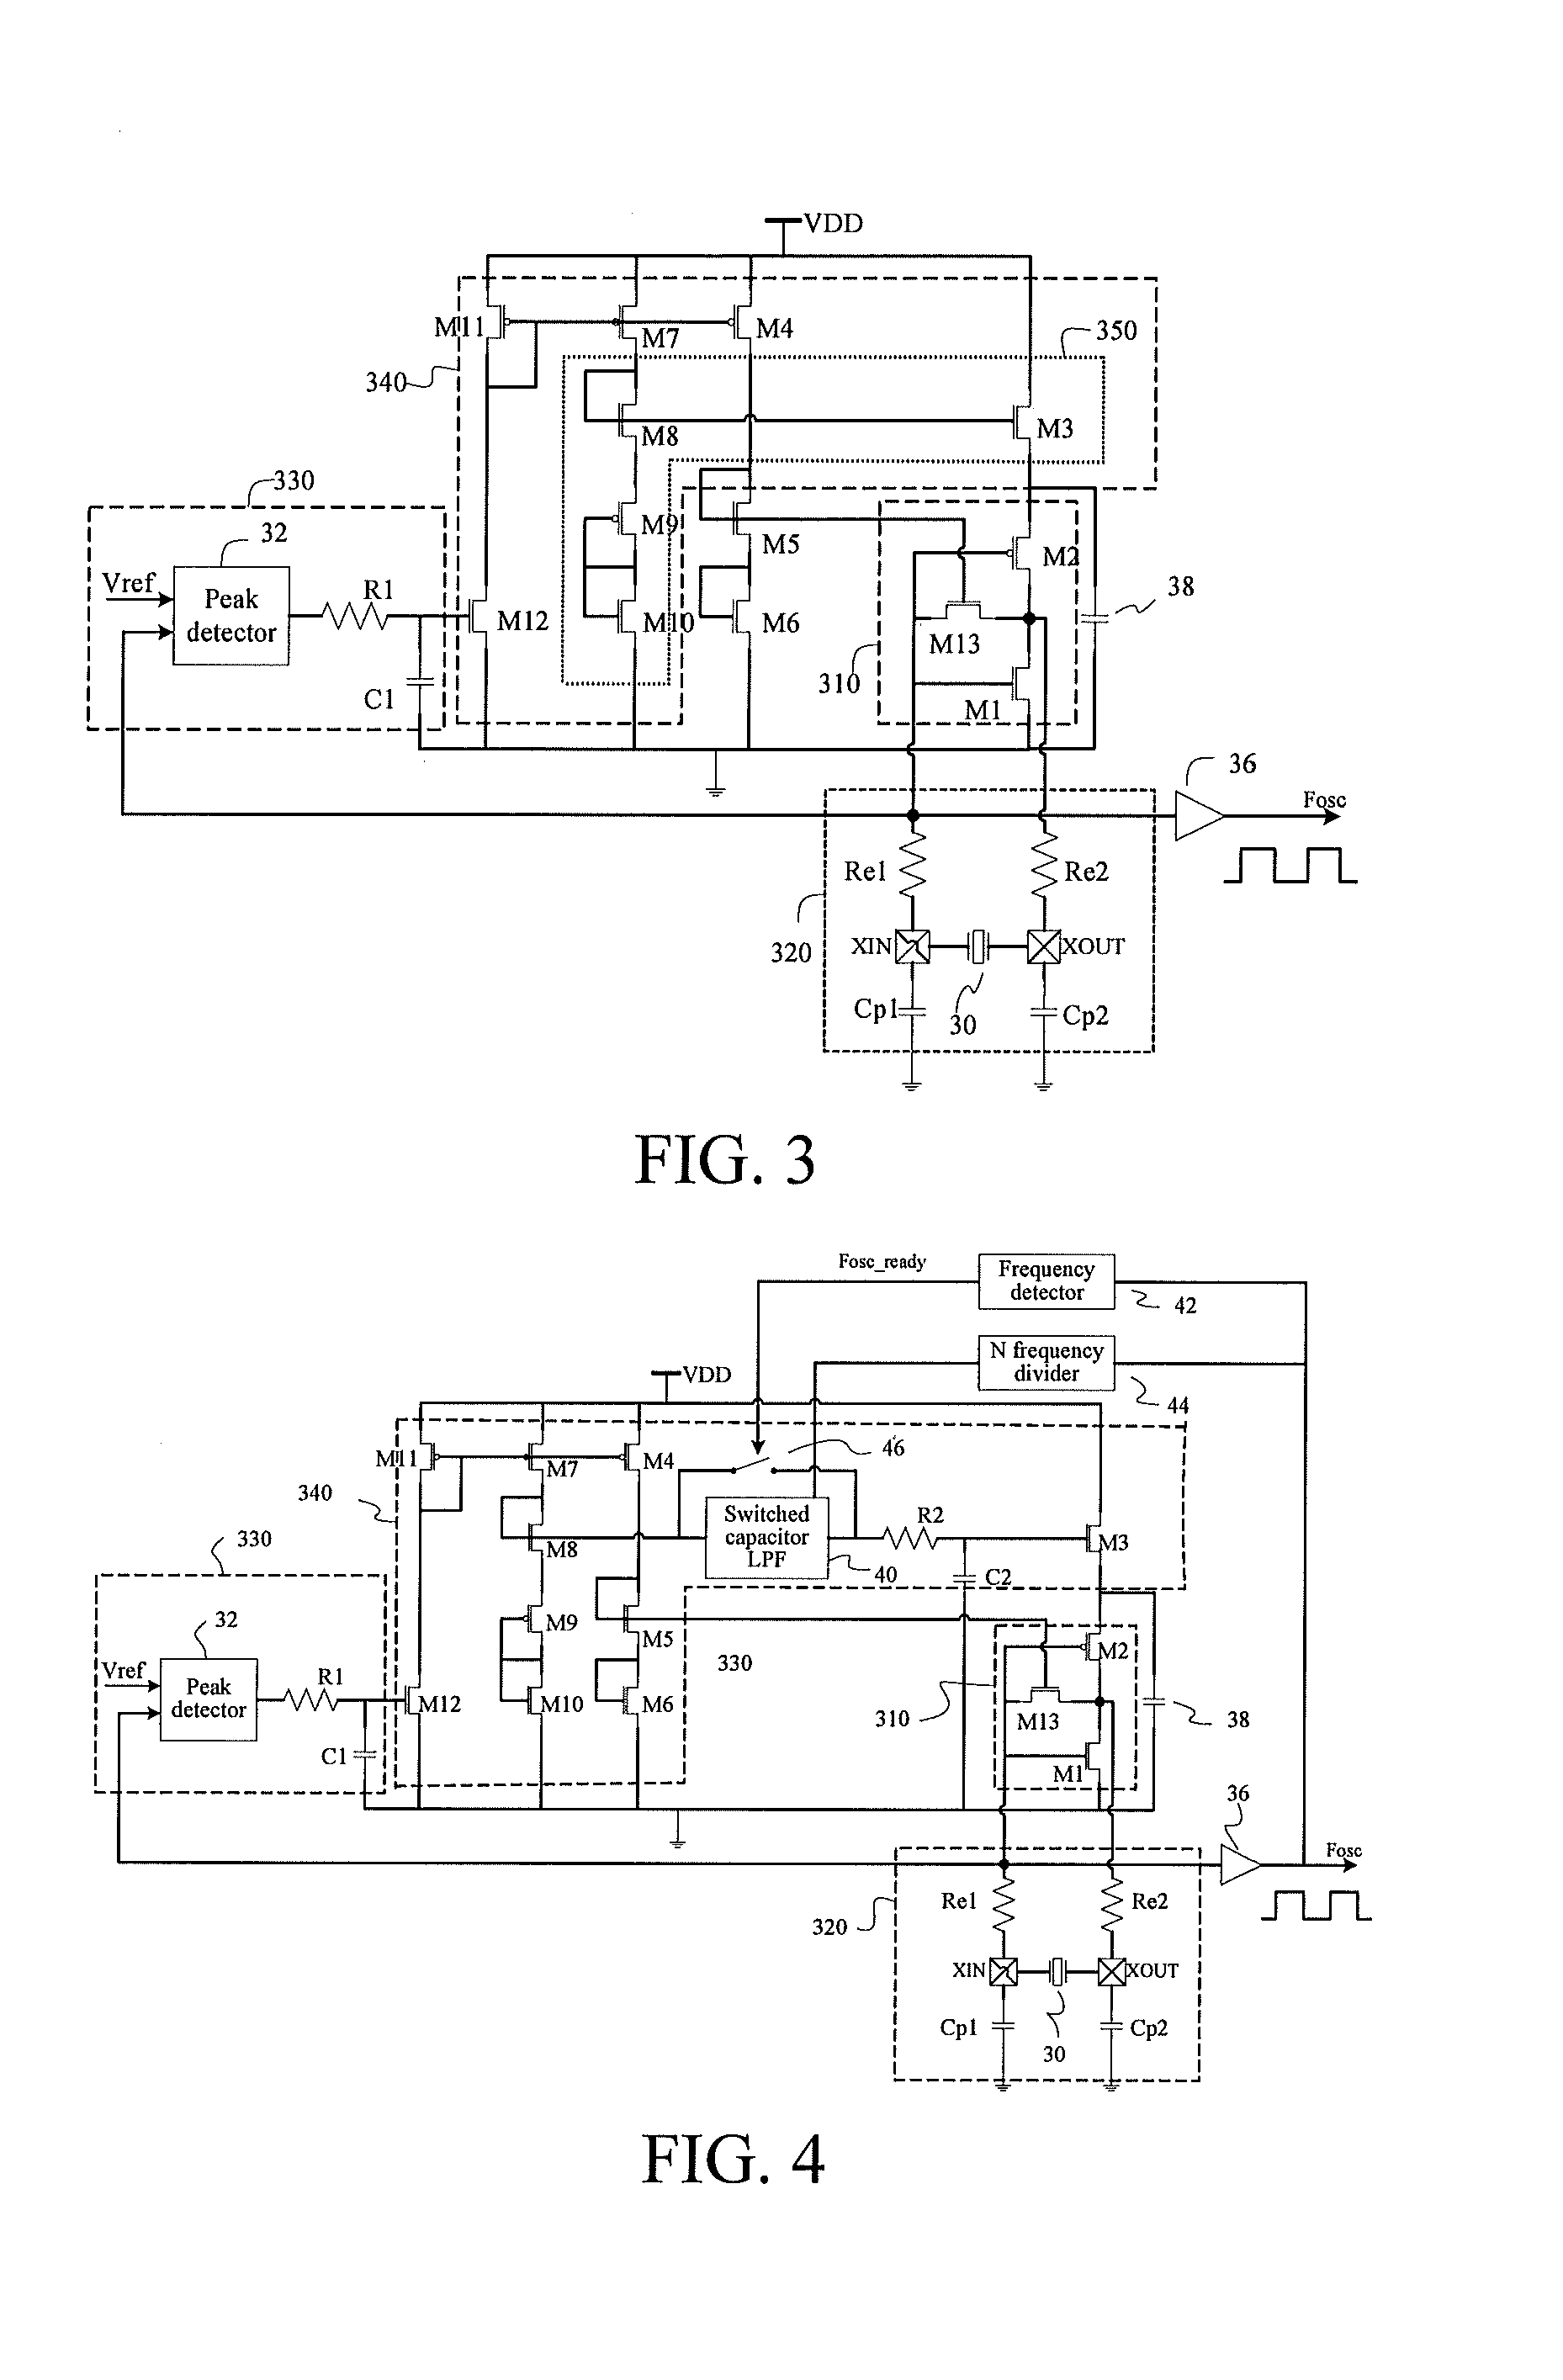 Crystal oscillator circuit having low power consumption, low jitter and wide operating range